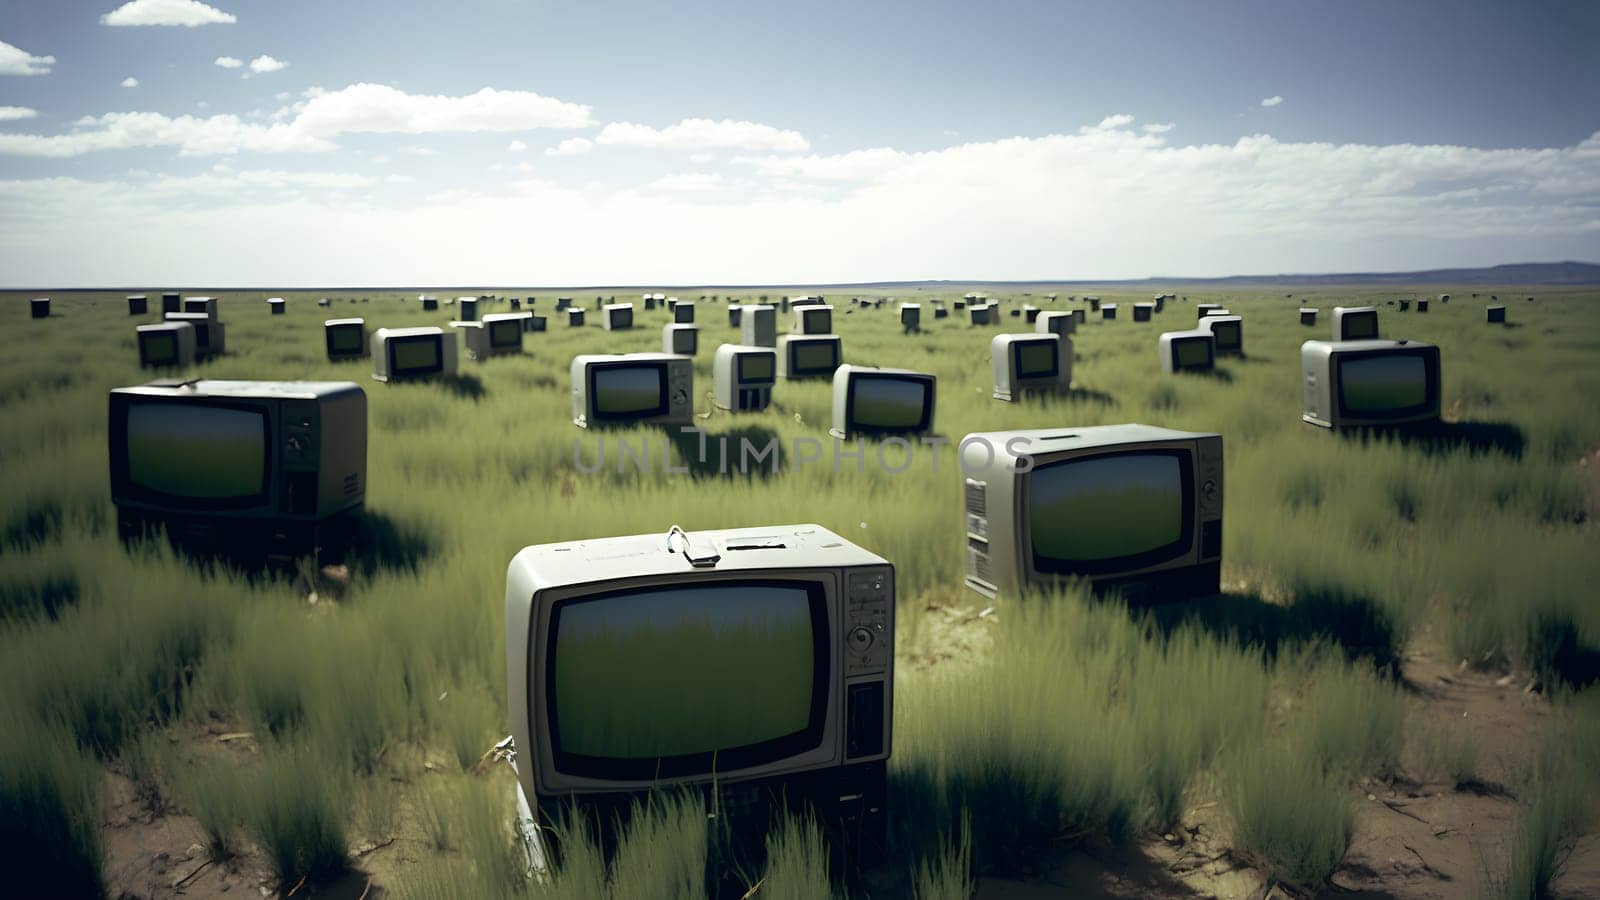 field covered with old analog tv sets at summer daylight, neural network generated art by z1b